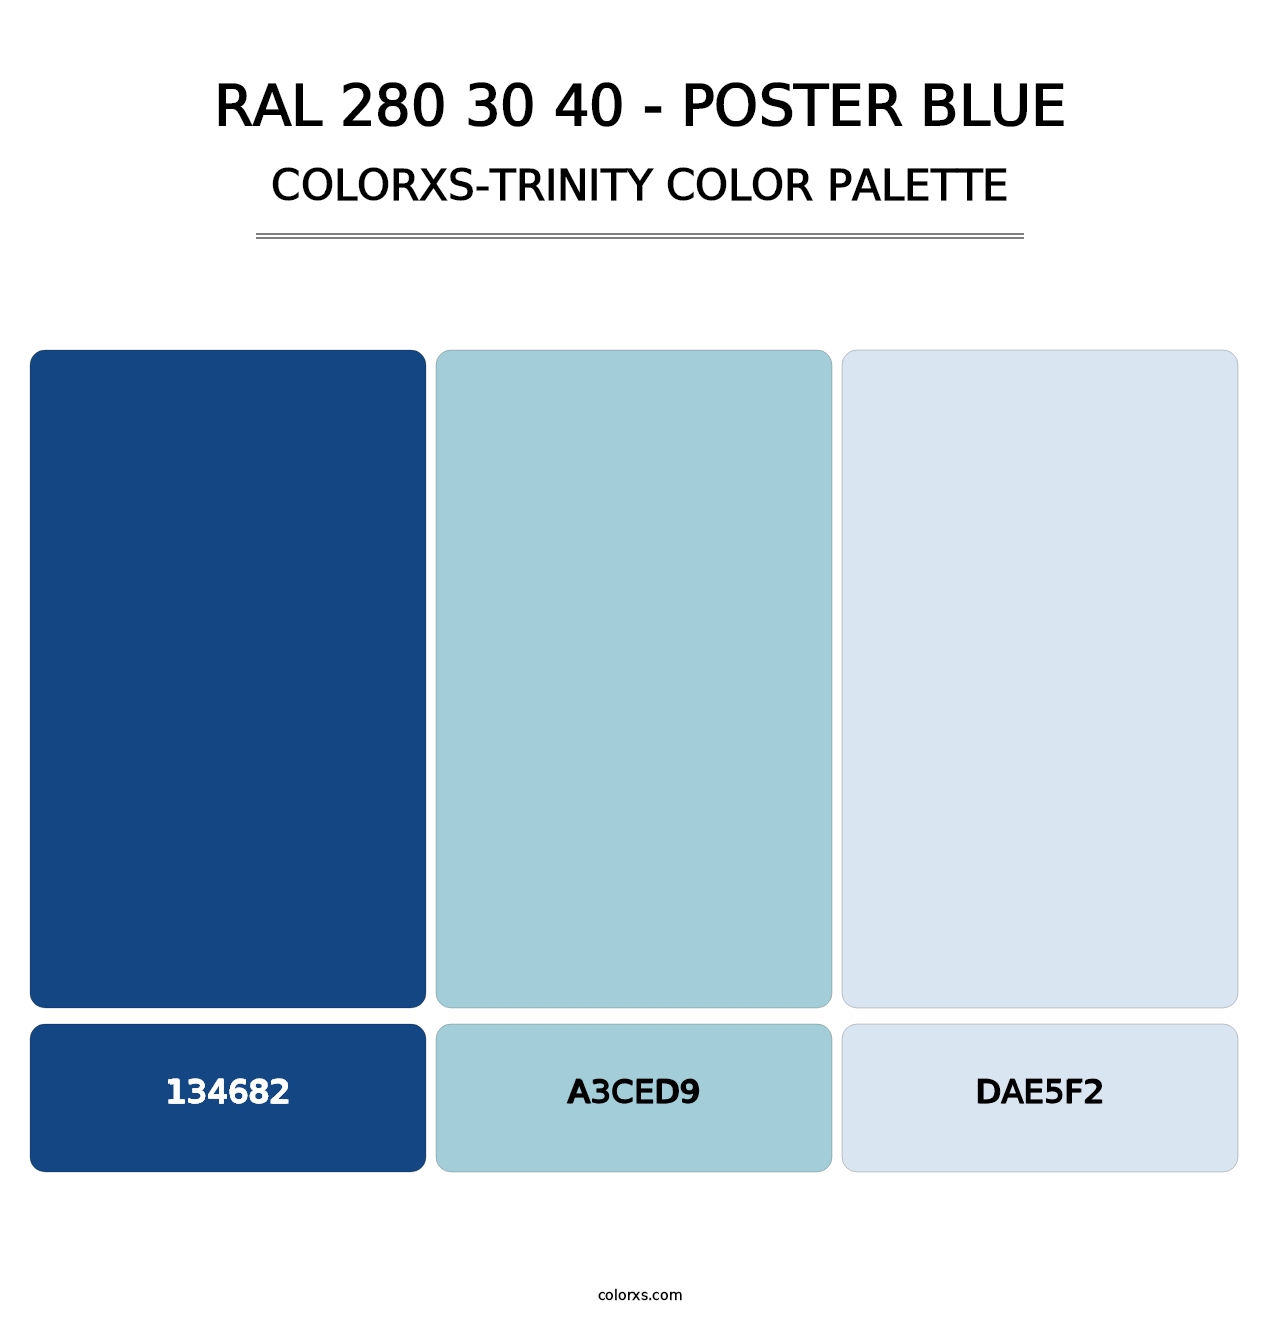 RAL 280 30 40 - Poster Blue - Colorxs Trinity Palette